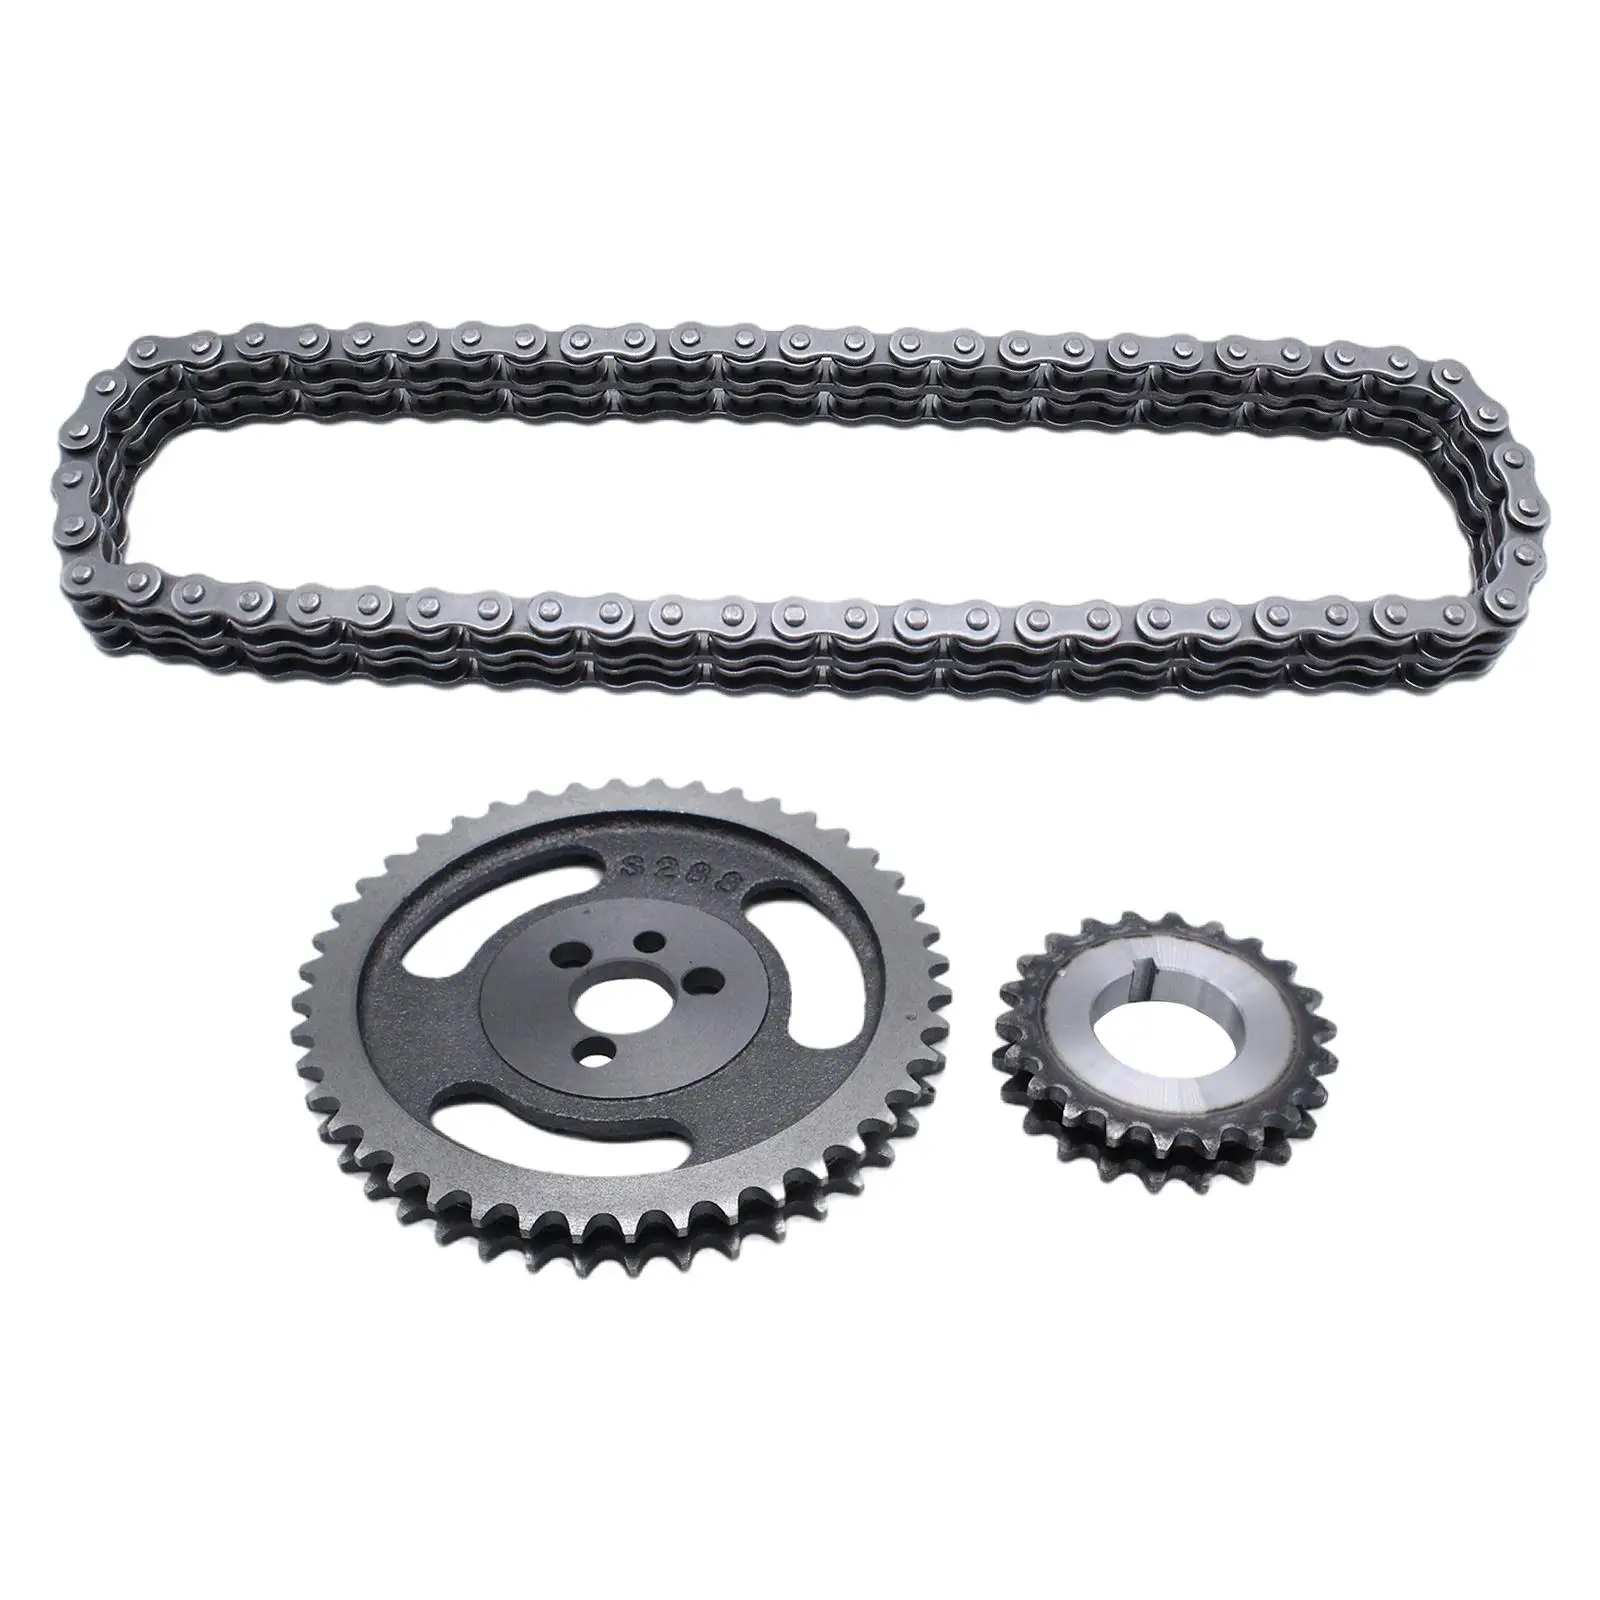 Double Roller Timing Chain Set TS163 Fits for Sbc 5.7L 383 327